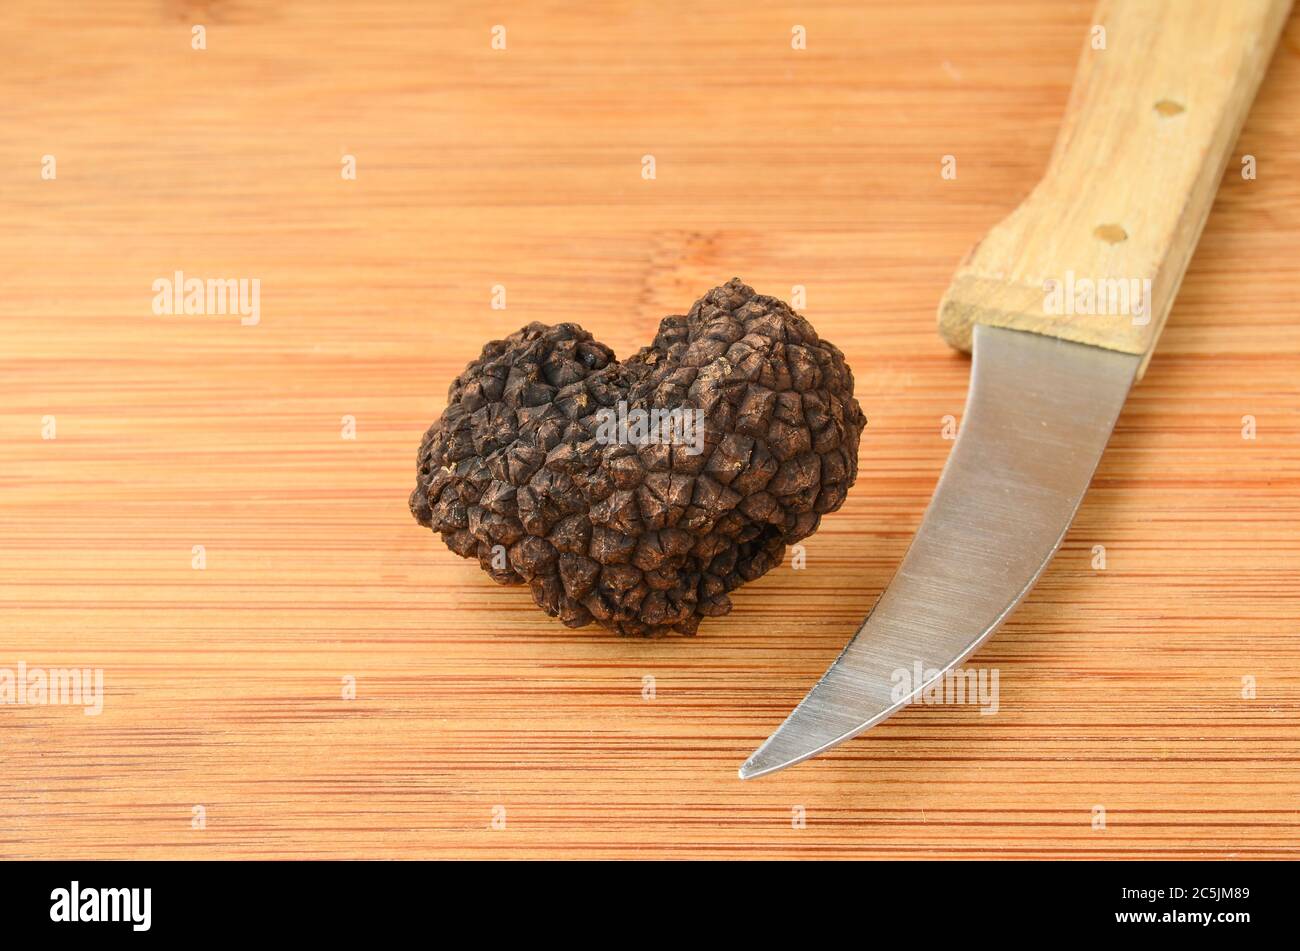 Heart shaped Black truffle and knife on wooden background Stock Photo